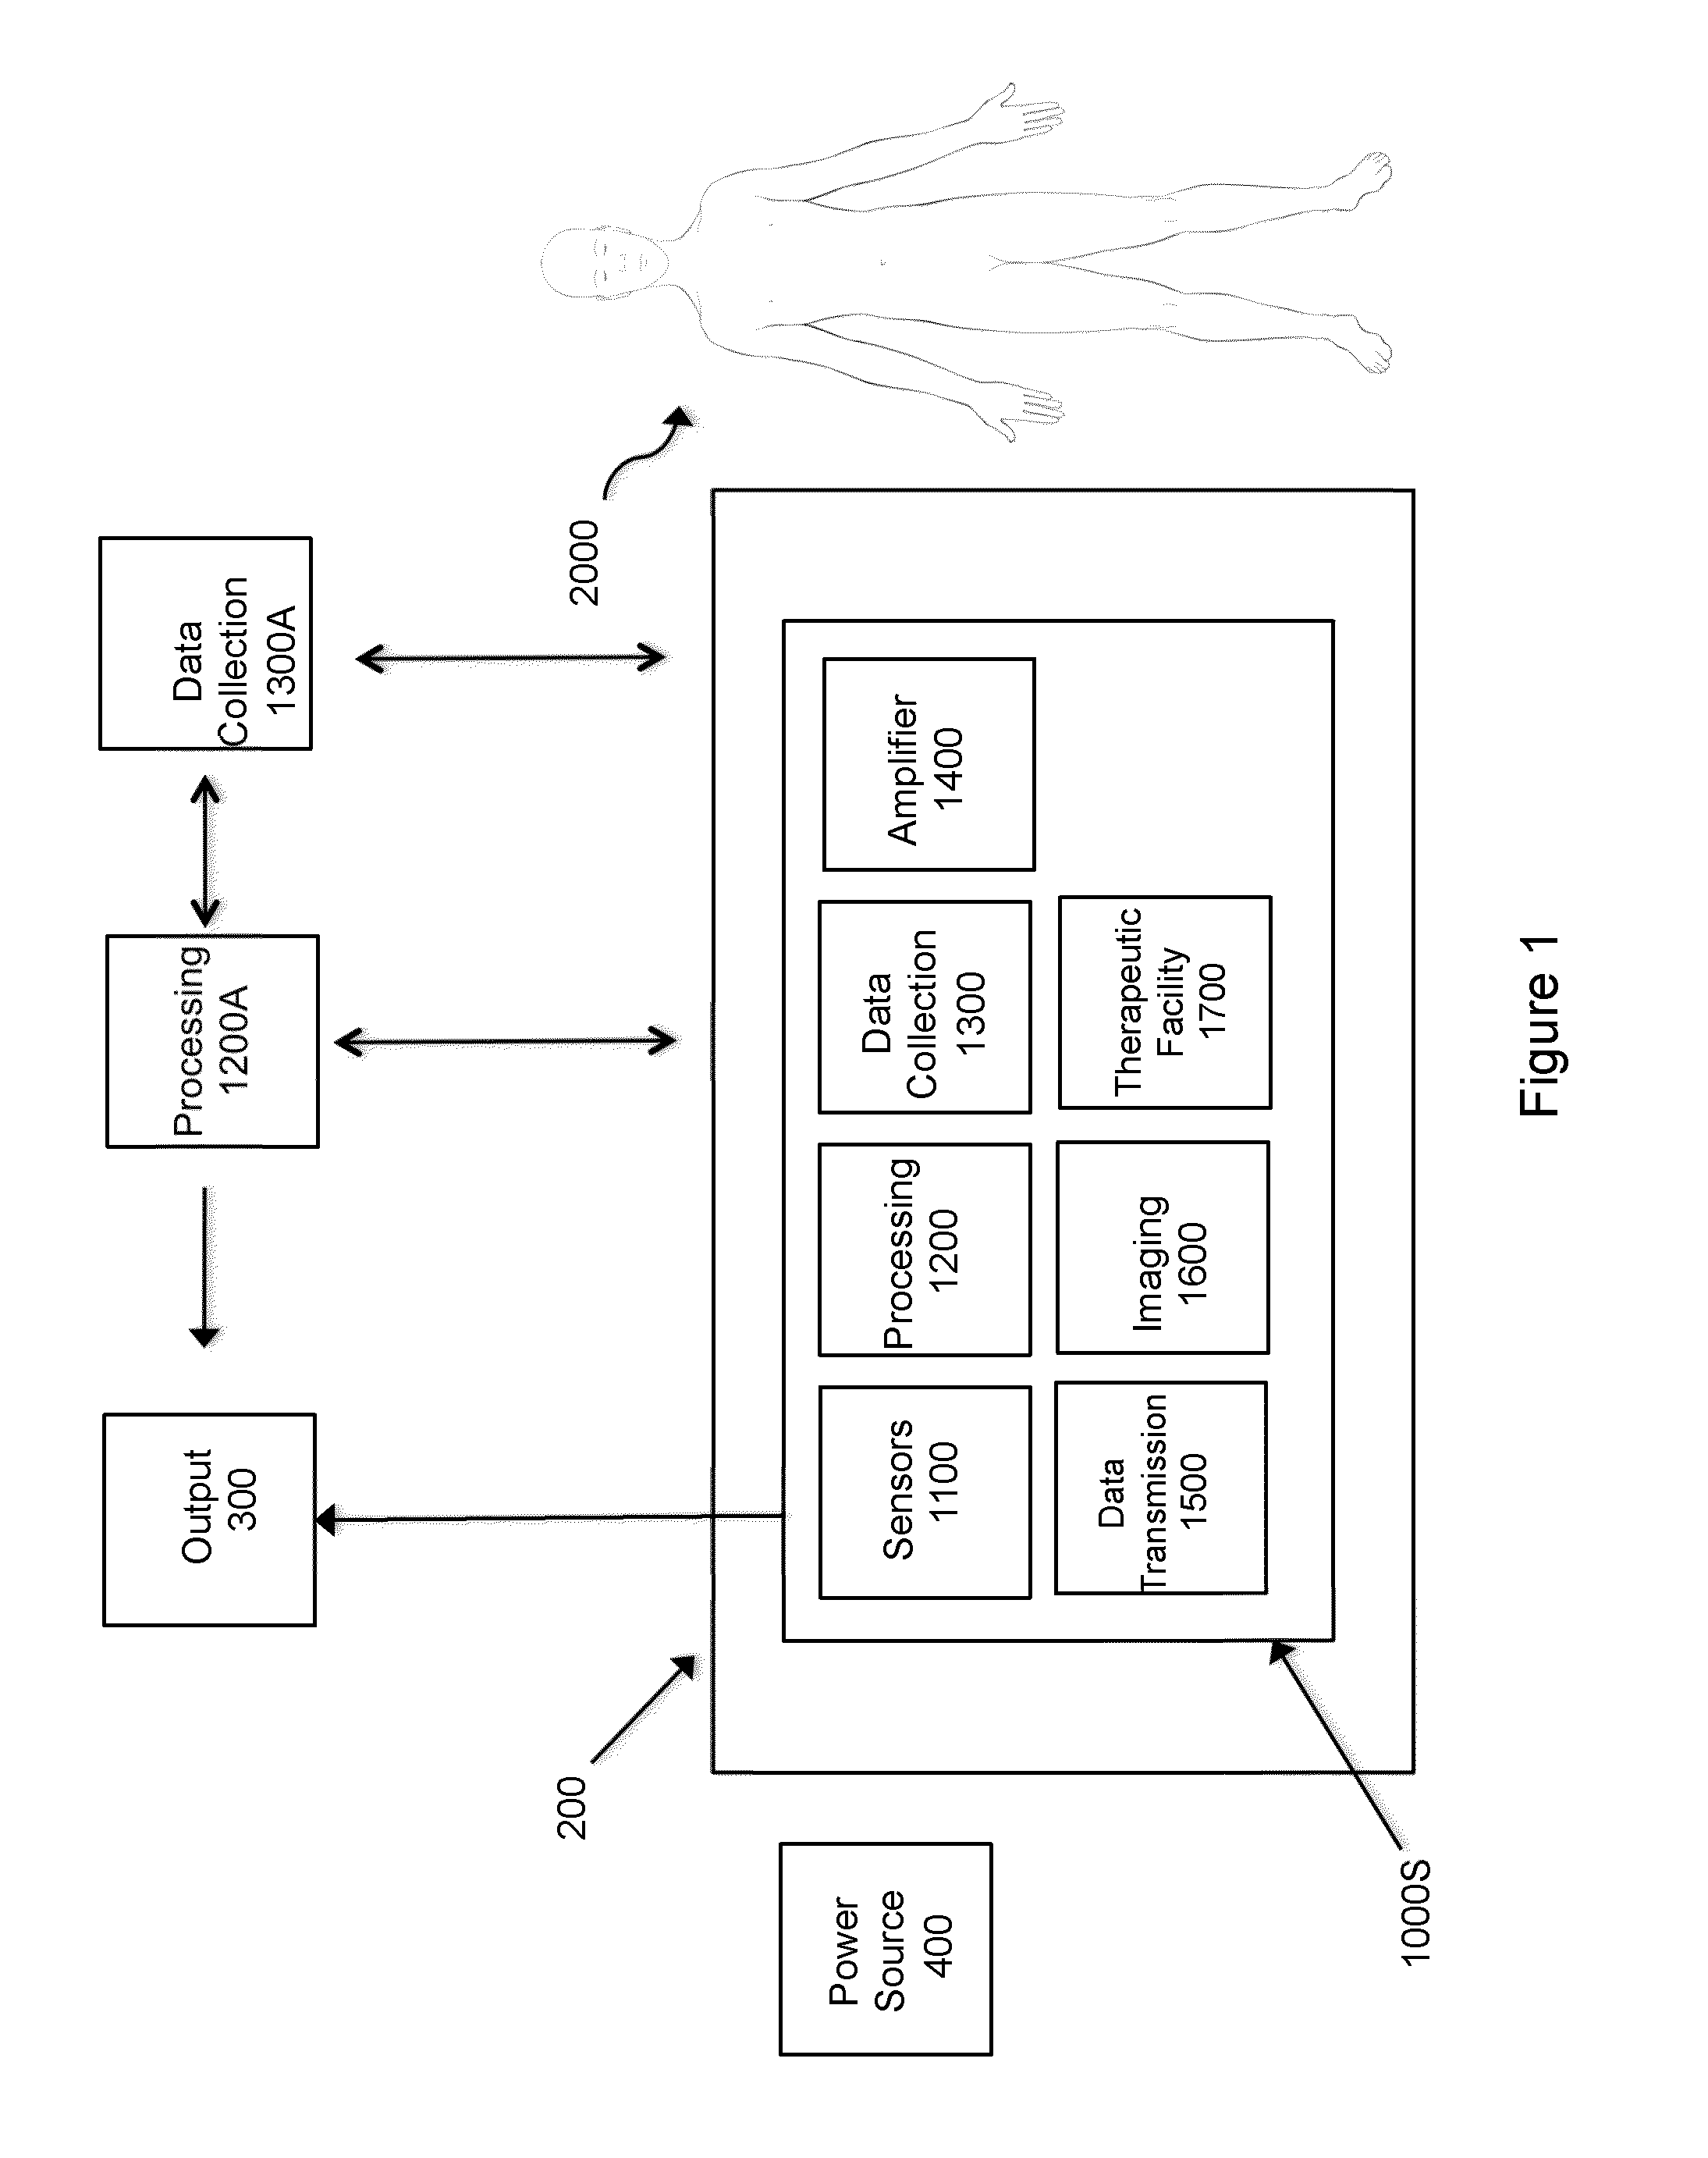 Methods and applications of non-planar imaging arrays